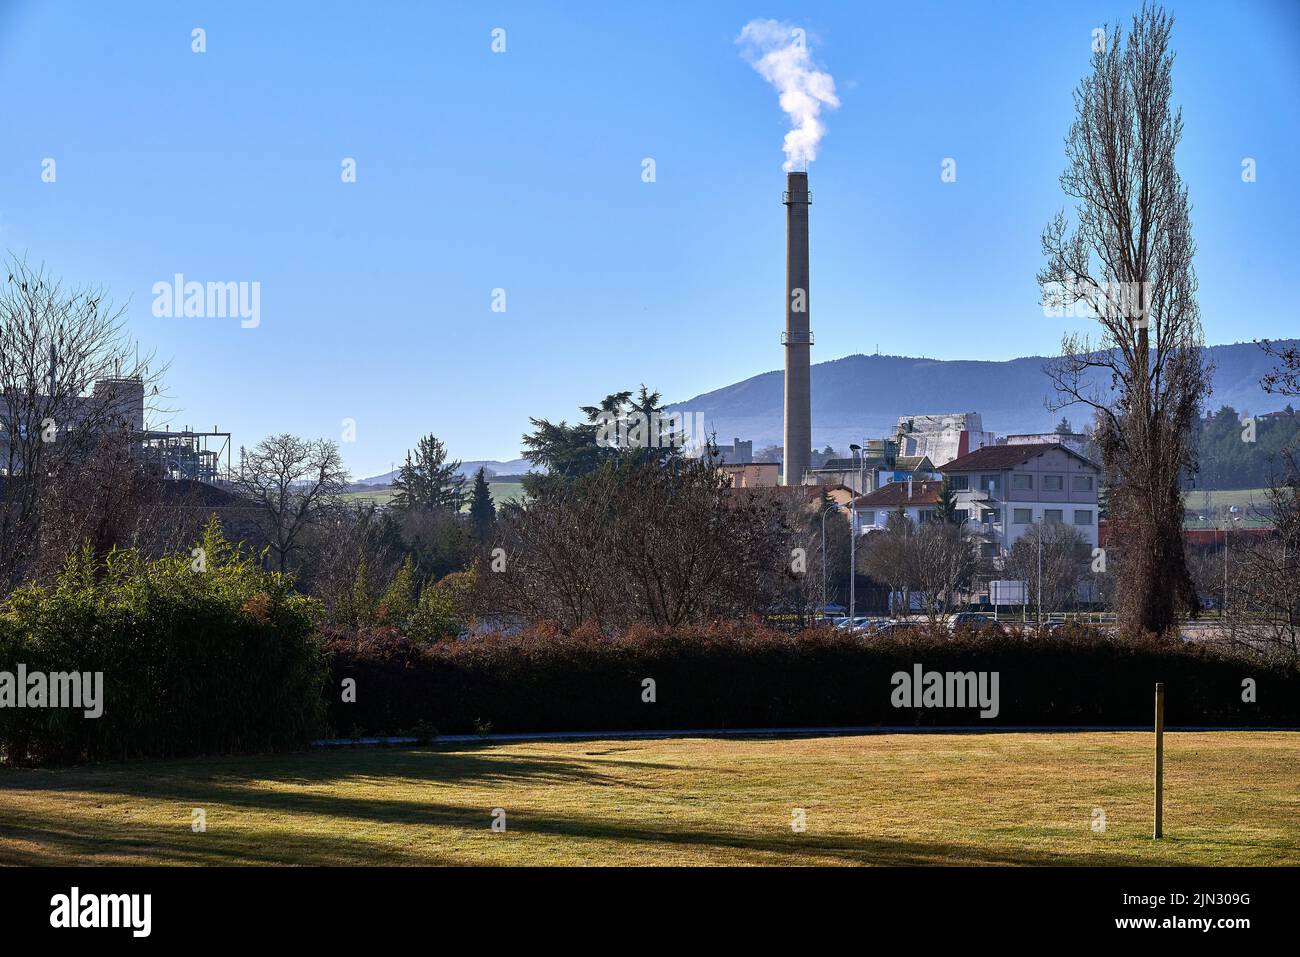 Landscape with a chimney releasing polluting gases into the air Stock Photo